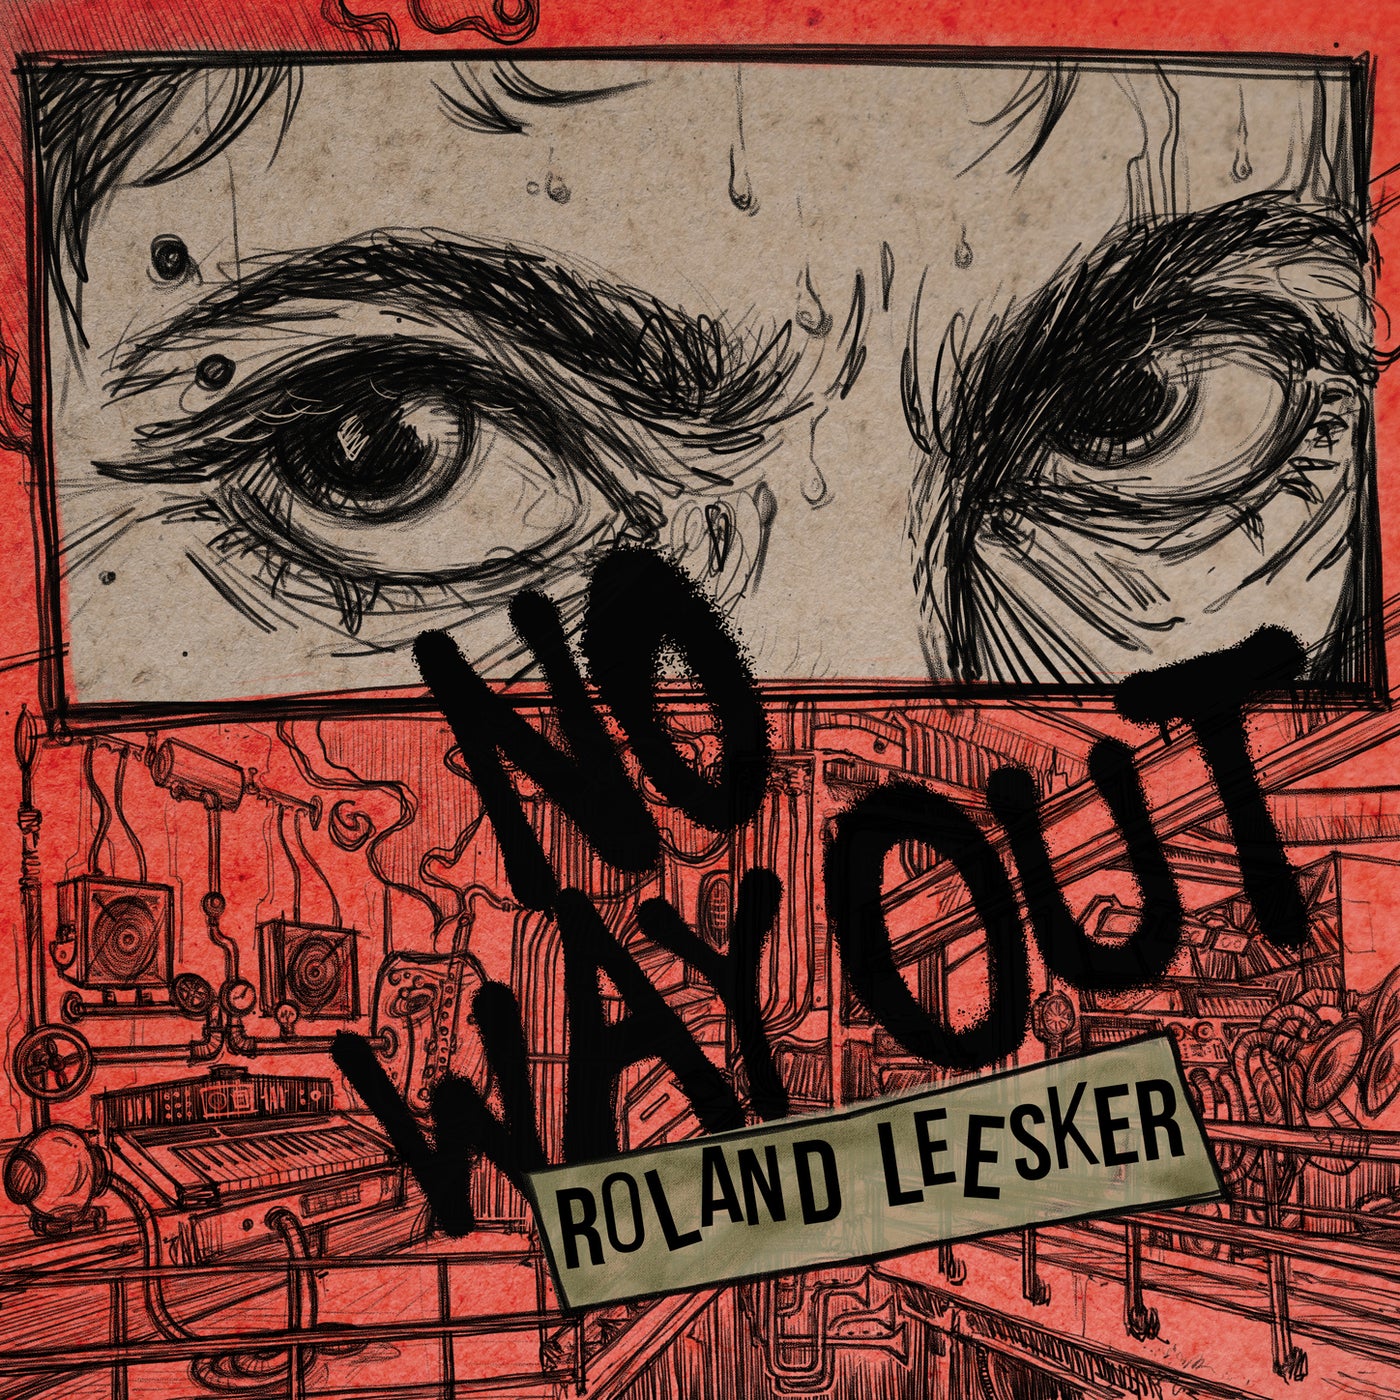 Roland Leesker – No Way Out [GPM640]